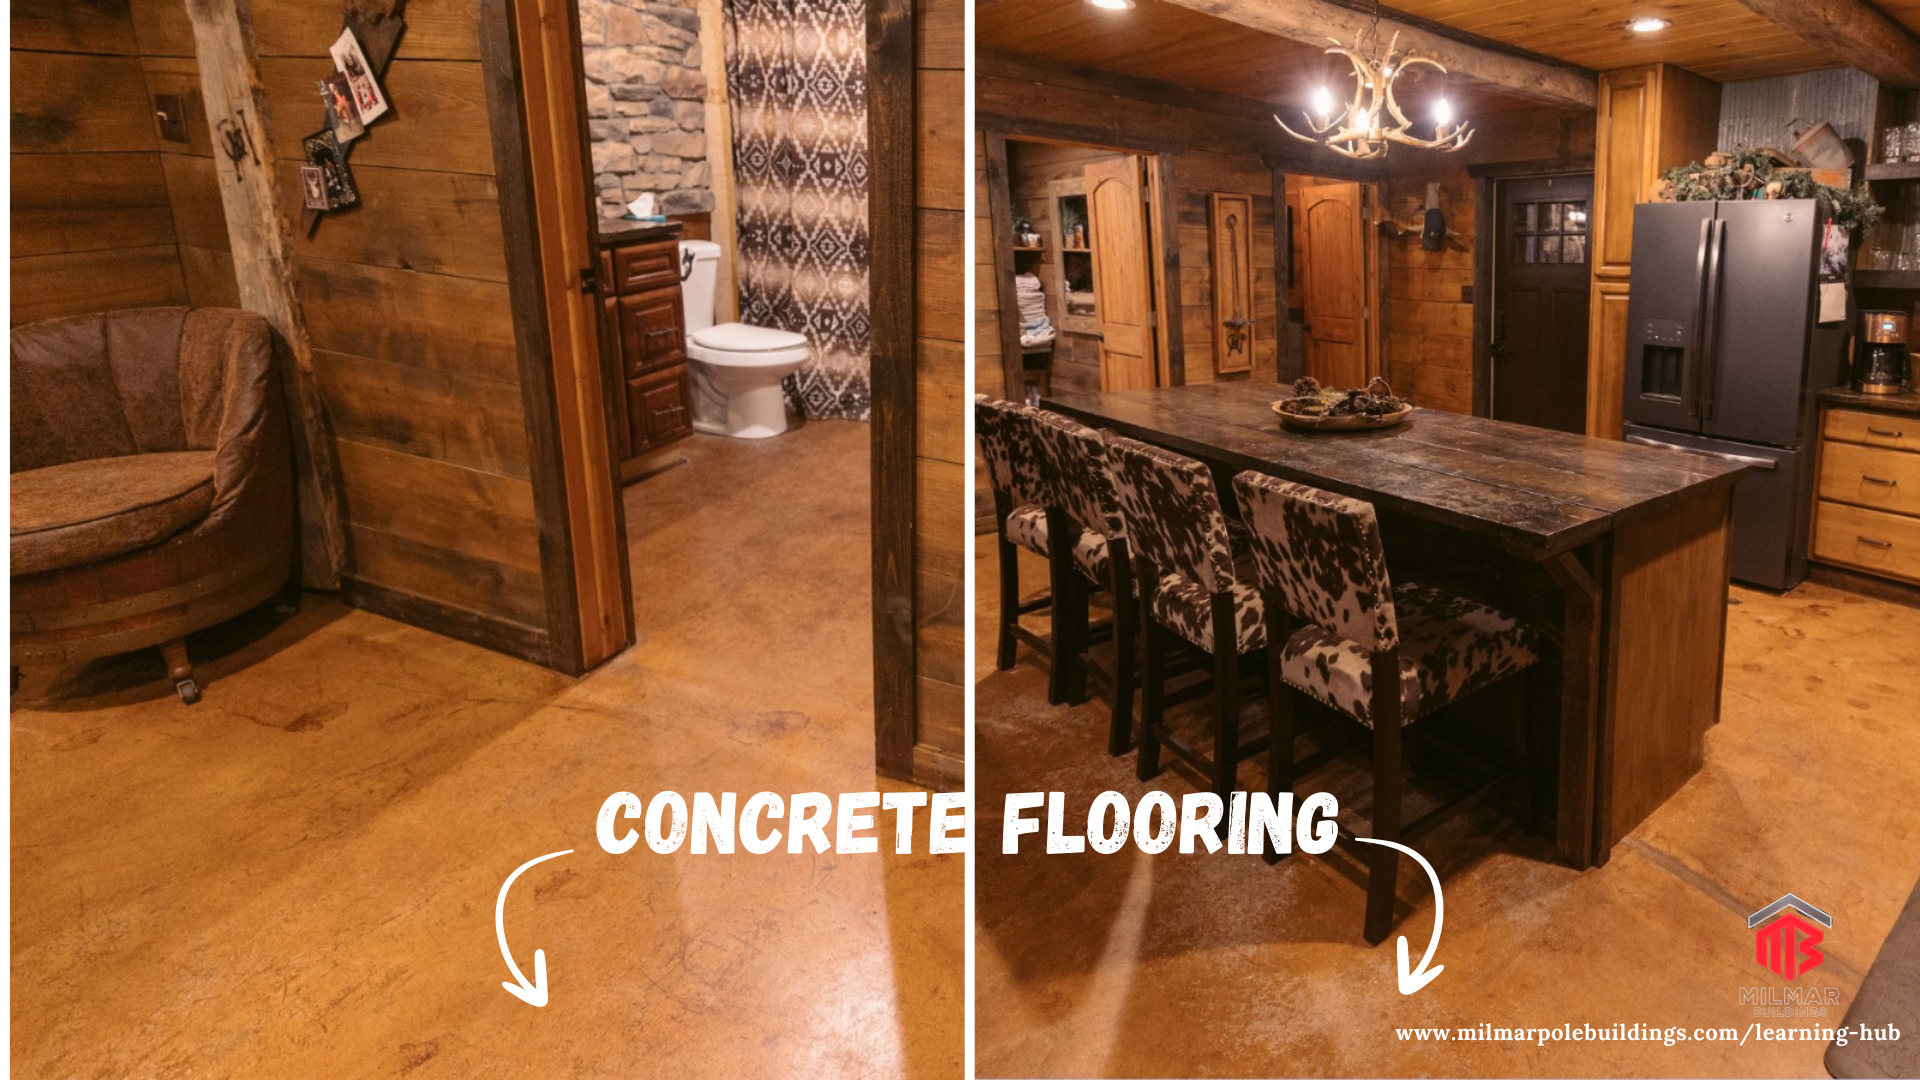 Are concrete floors cold? - Image